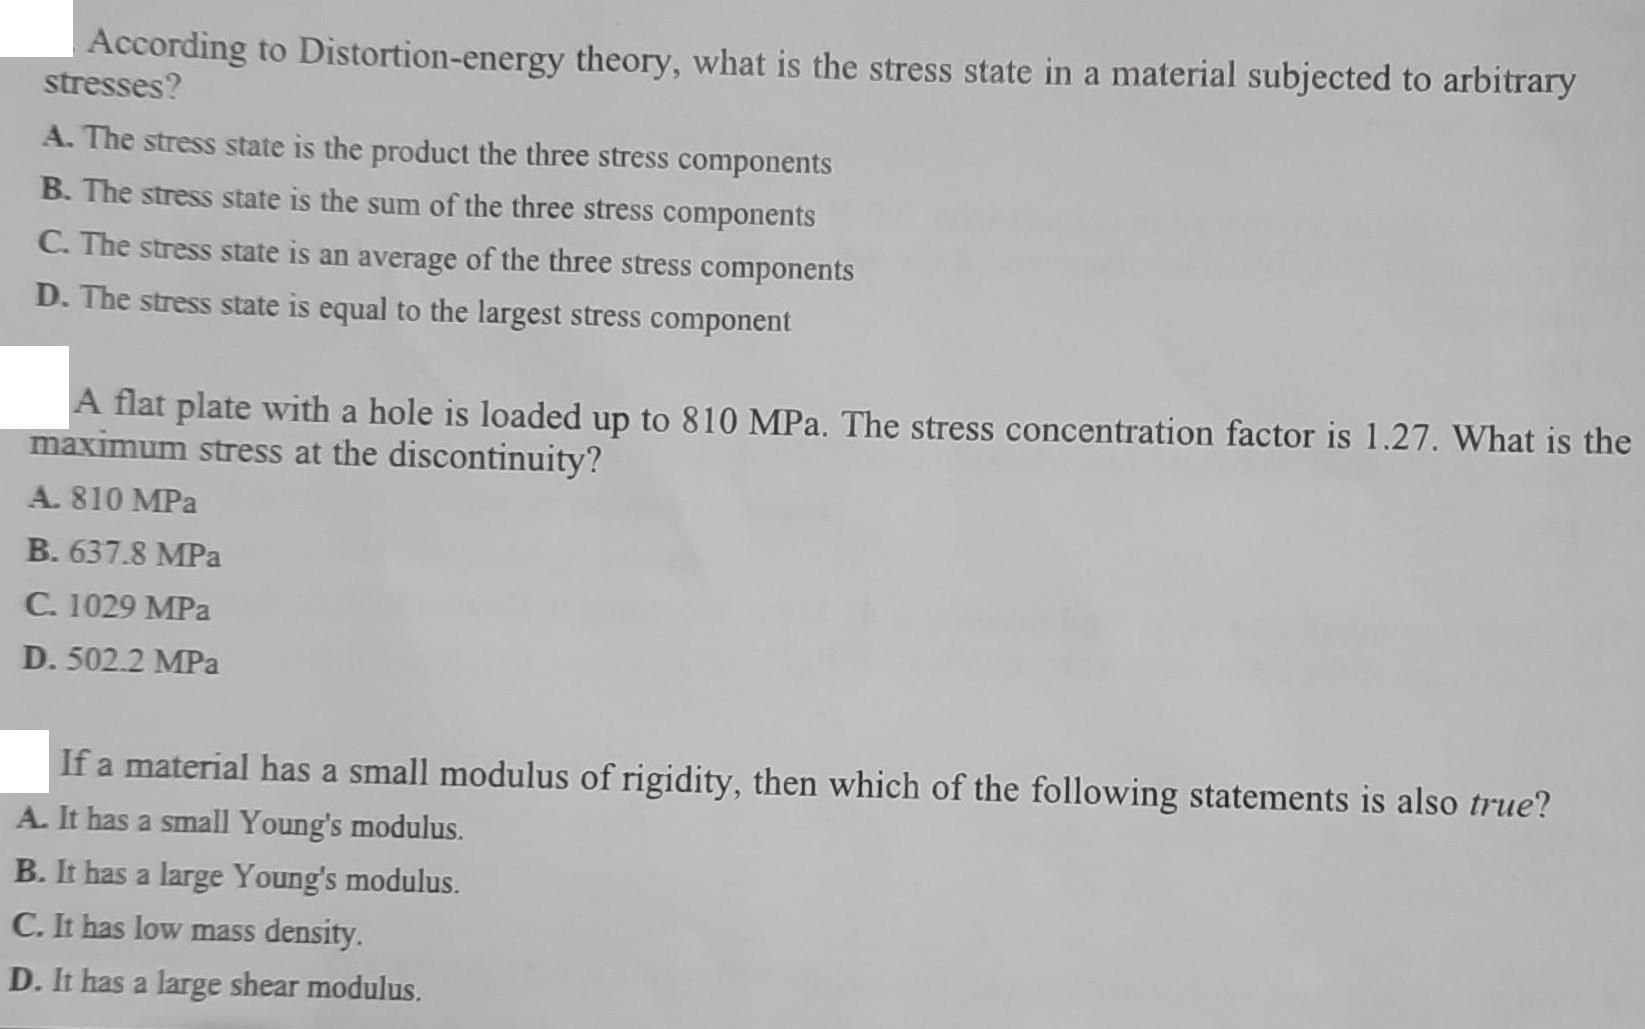 According to Distortion-energy theory, what is the stress state in a material subjected to arbitrary